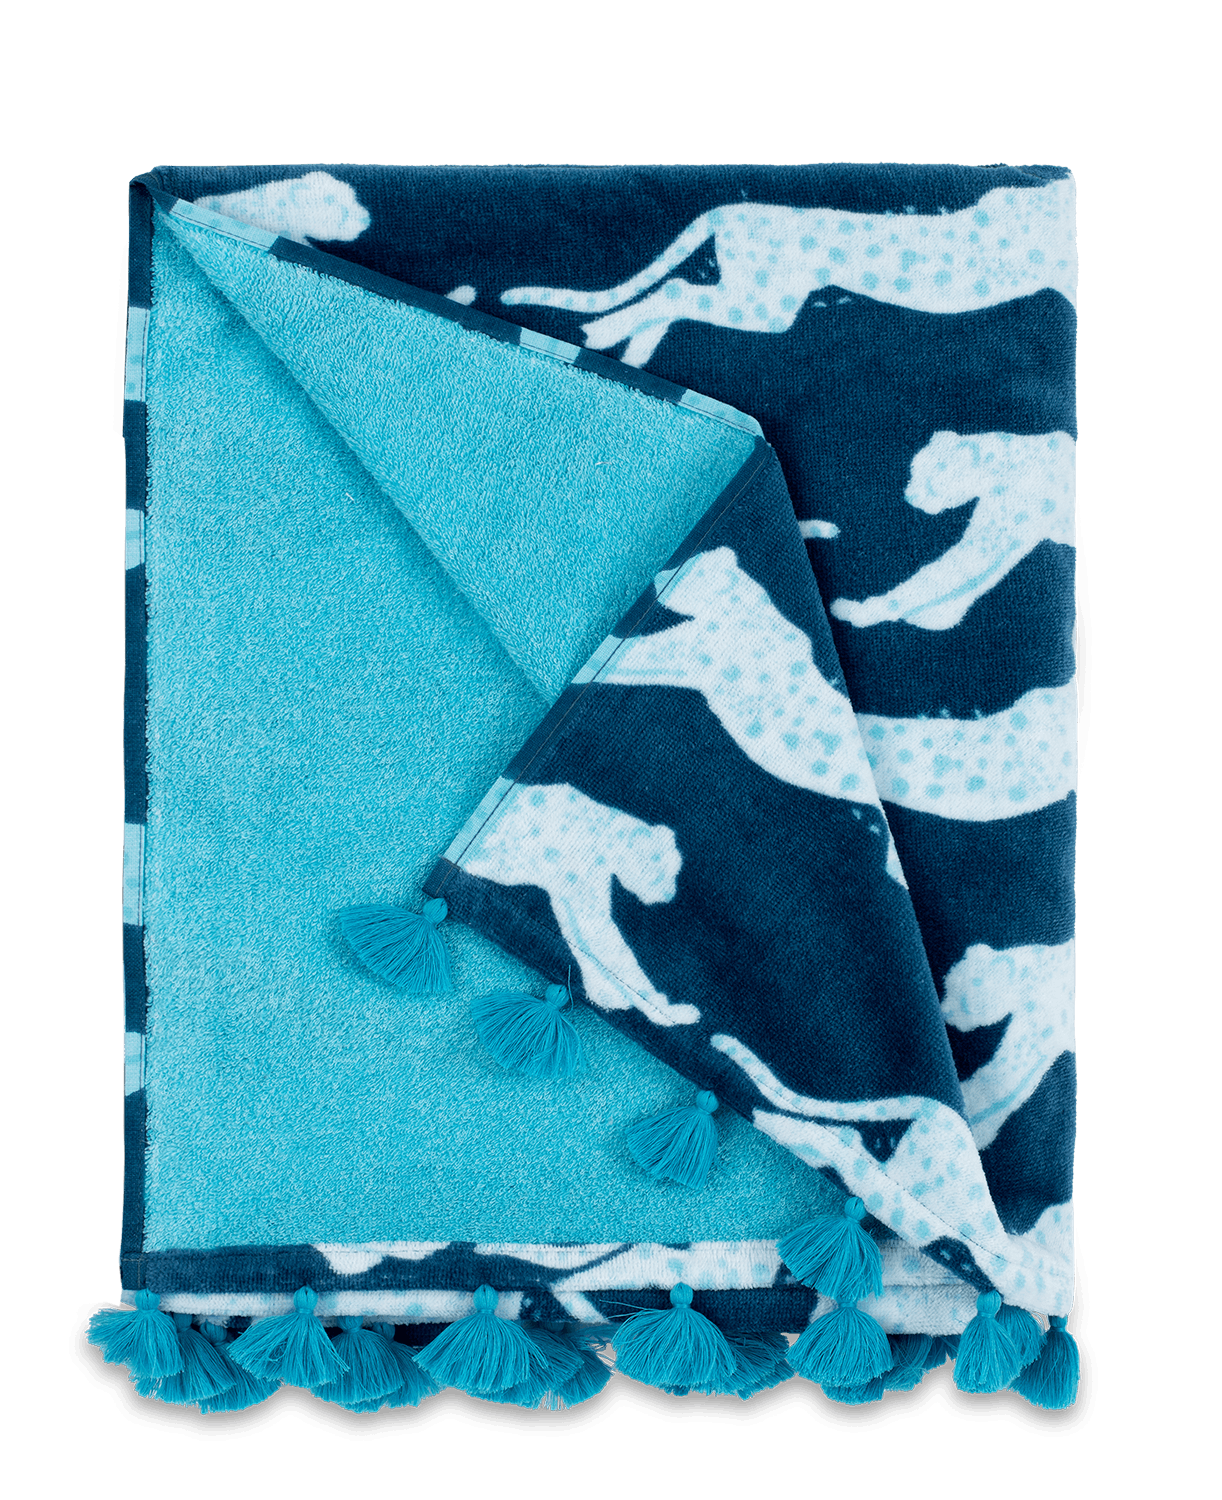 Leaping Leopard Beach Towel - Navy